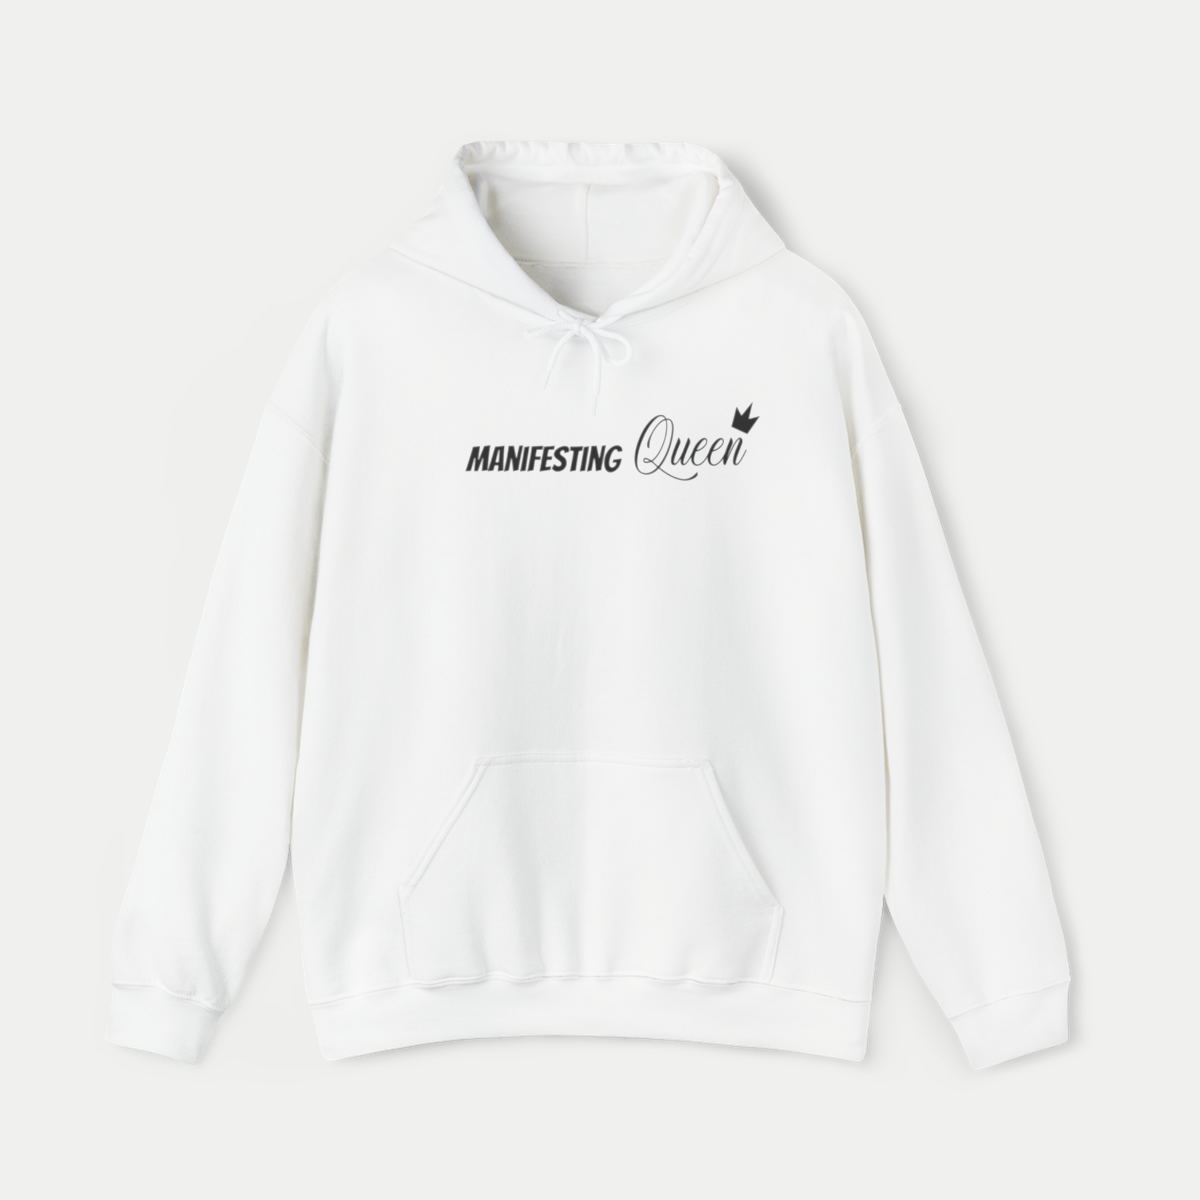 Manifesting Queen: Attract Your Desires Hooded Sweatshirt Color White Image Front